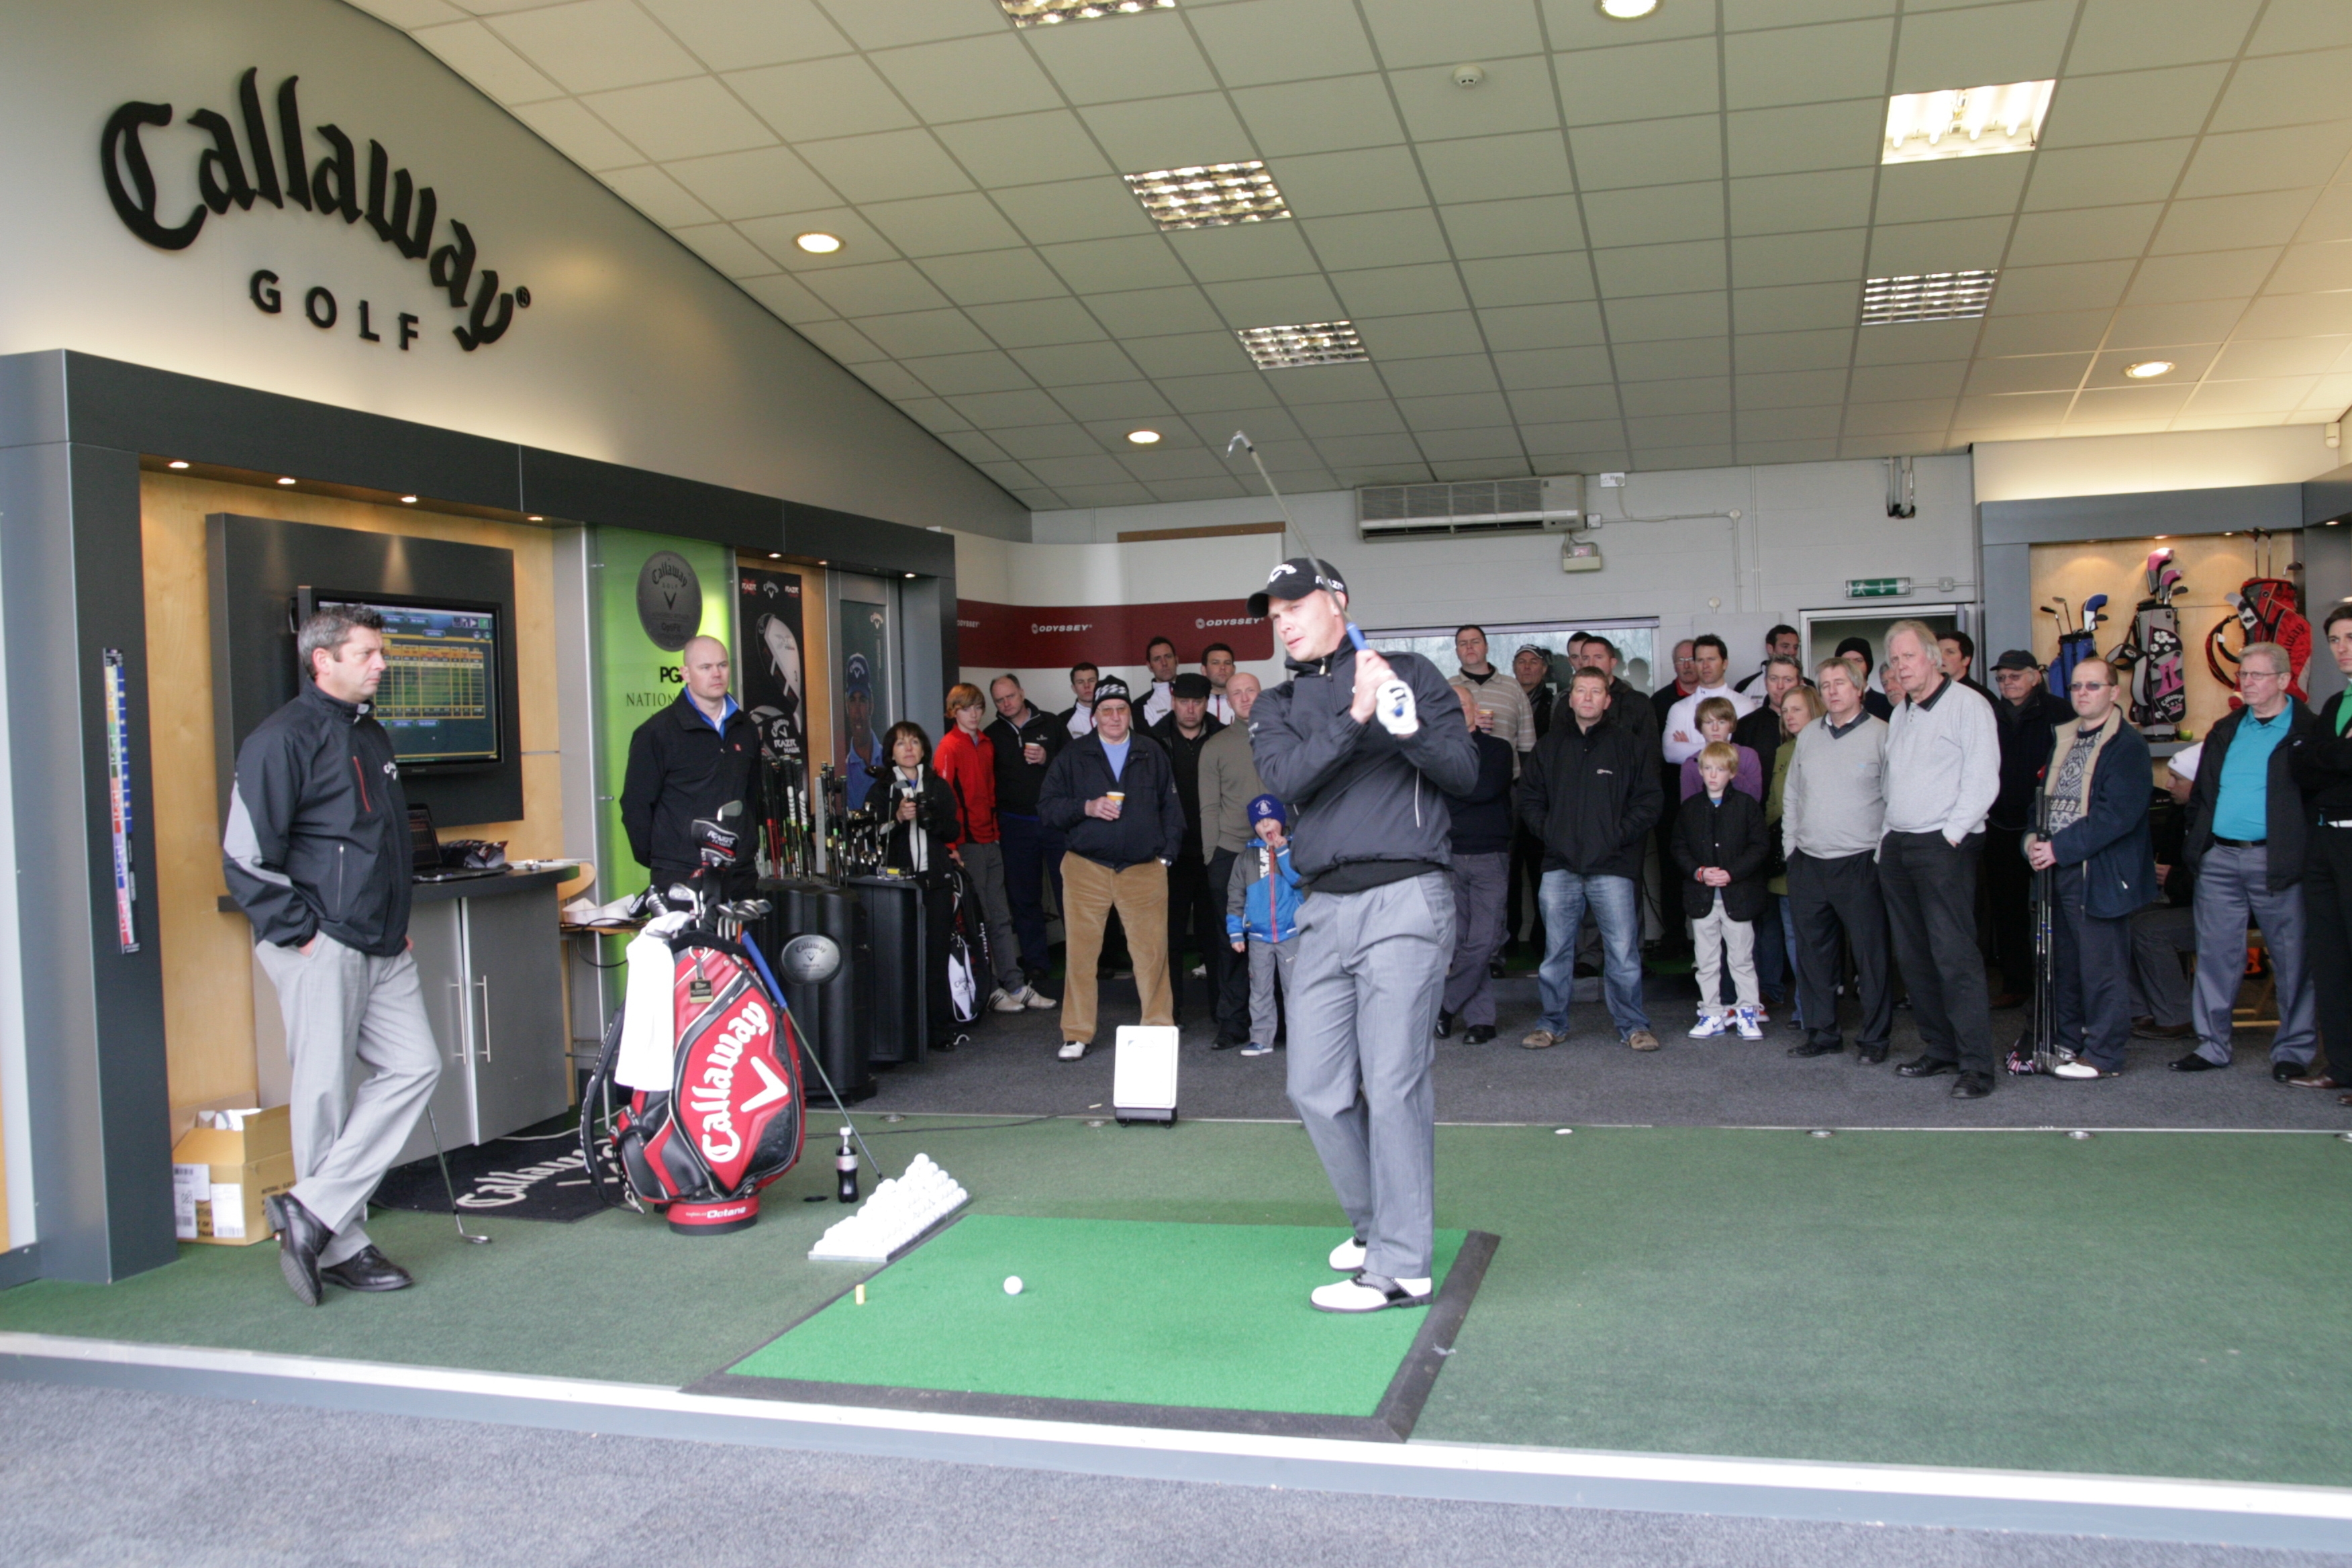 Willett gives a demo to the eager onlookers